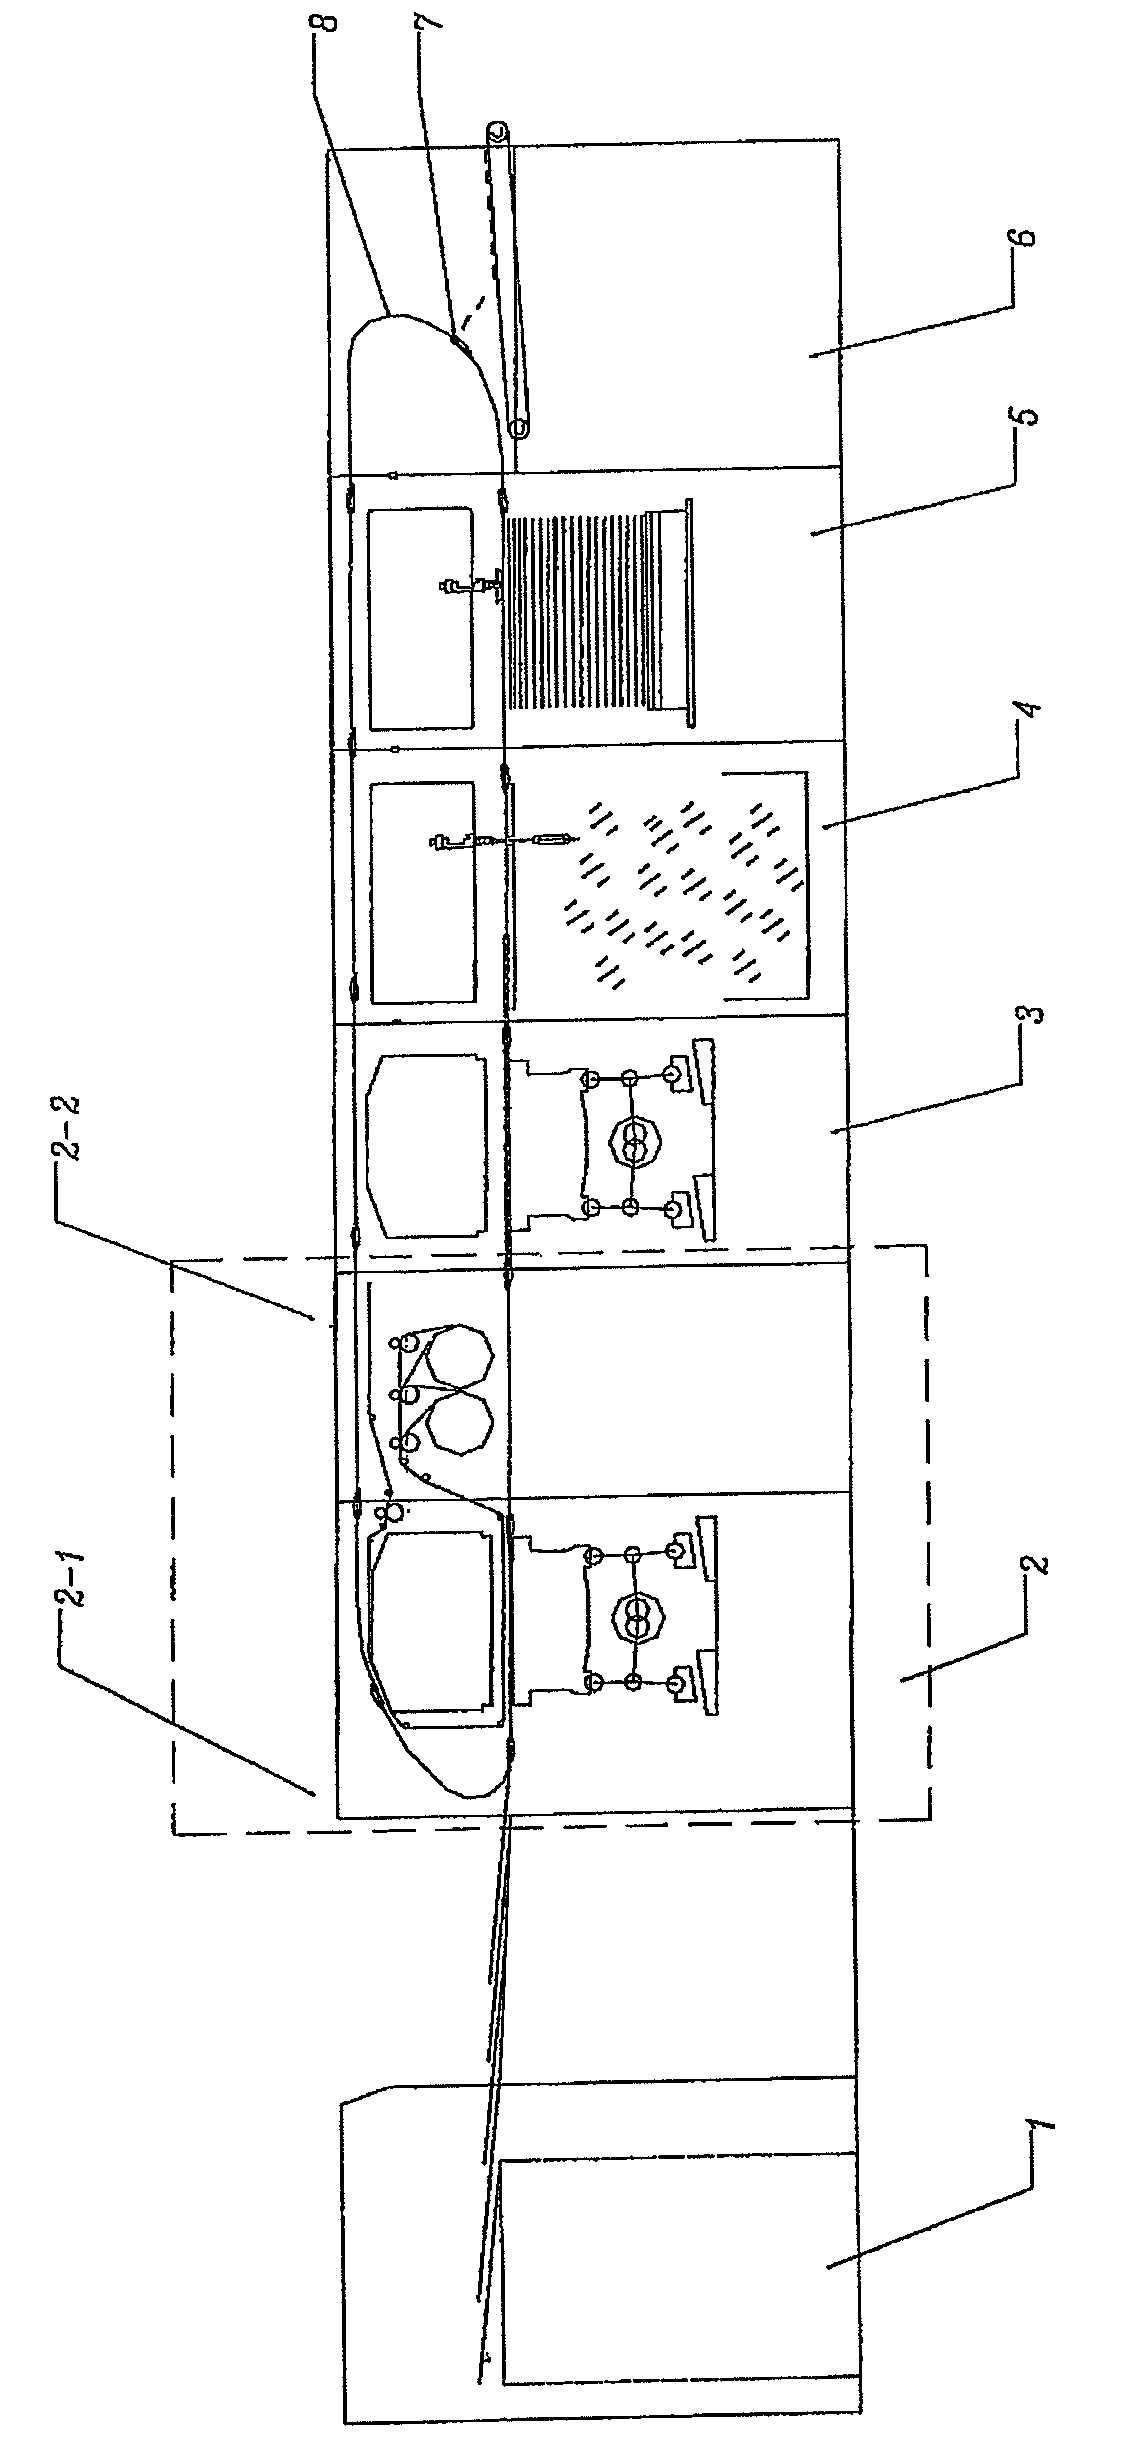 Post-press apparatus and a method to accomplish hot foil stamping, die-cutting and blank separation in a single pass